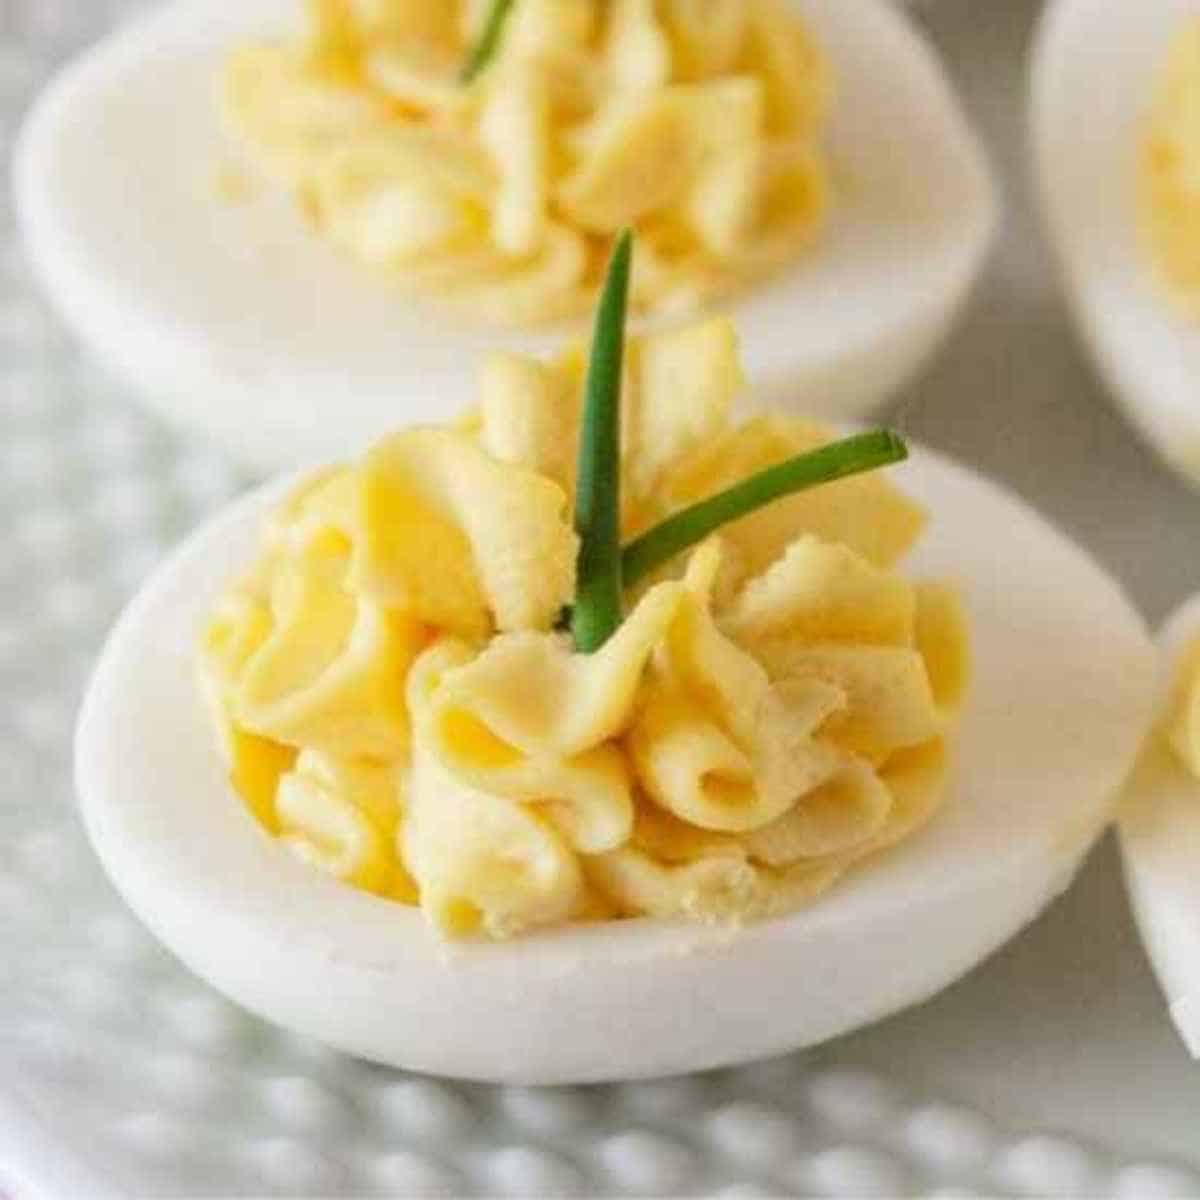 A deviled egg half on a plate.